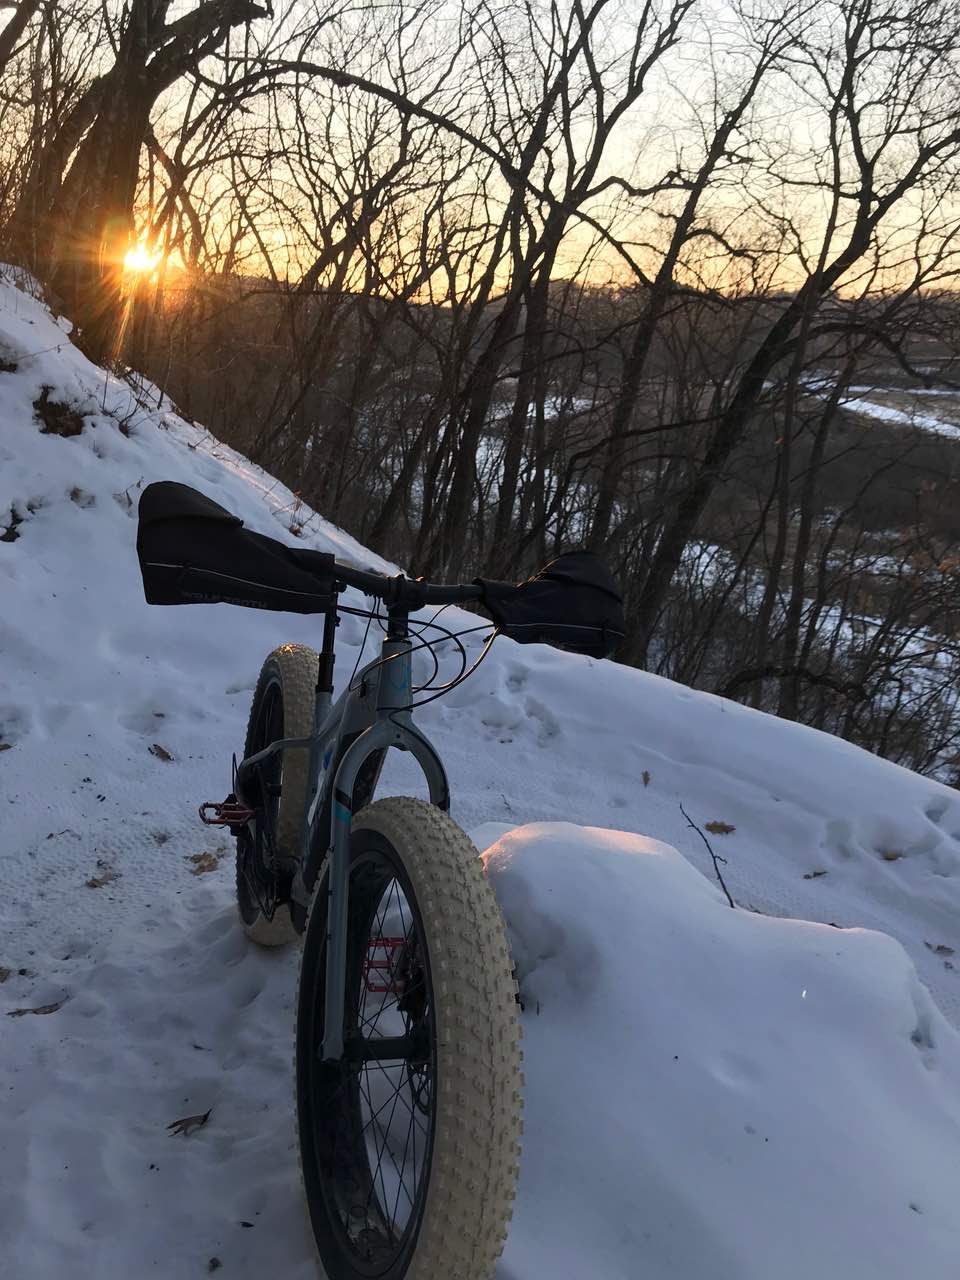 bikerumor pic of the day a fat bike with white tires and bar mitts is on the side of a sloped trail covered in snow, the sun is setting behind some bare trees over the hills and the sky is light before the sun sets.